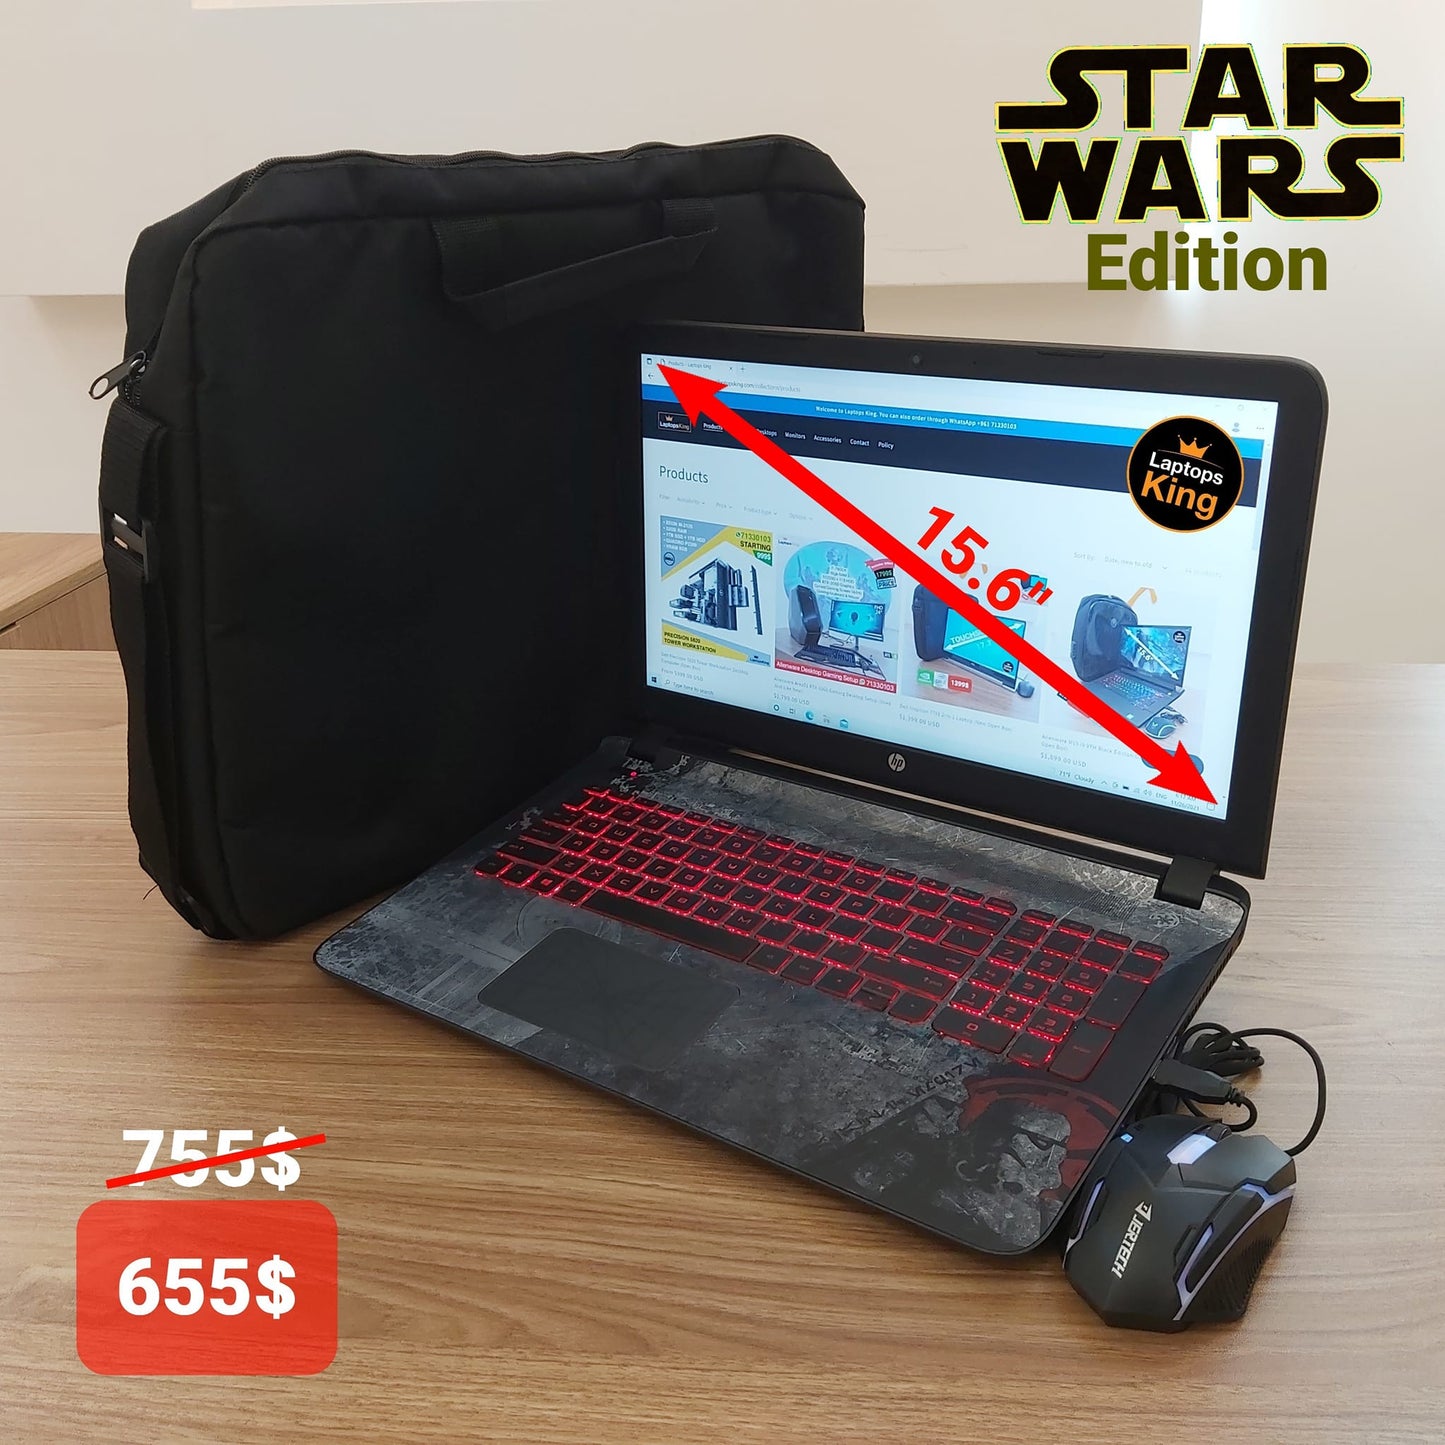 HP Star Wars Edition Gaming Laptop (Used Very Clean) Computer for sale Lebanon, laptop in Lebanon, laptop for sale Lebanon, best programming laptop, laptop for sale in Lebanon, laptops for sale in Lebanon, laptop for sale in Lebanon, buy computer Lebanon, buy laptop Lebanon.